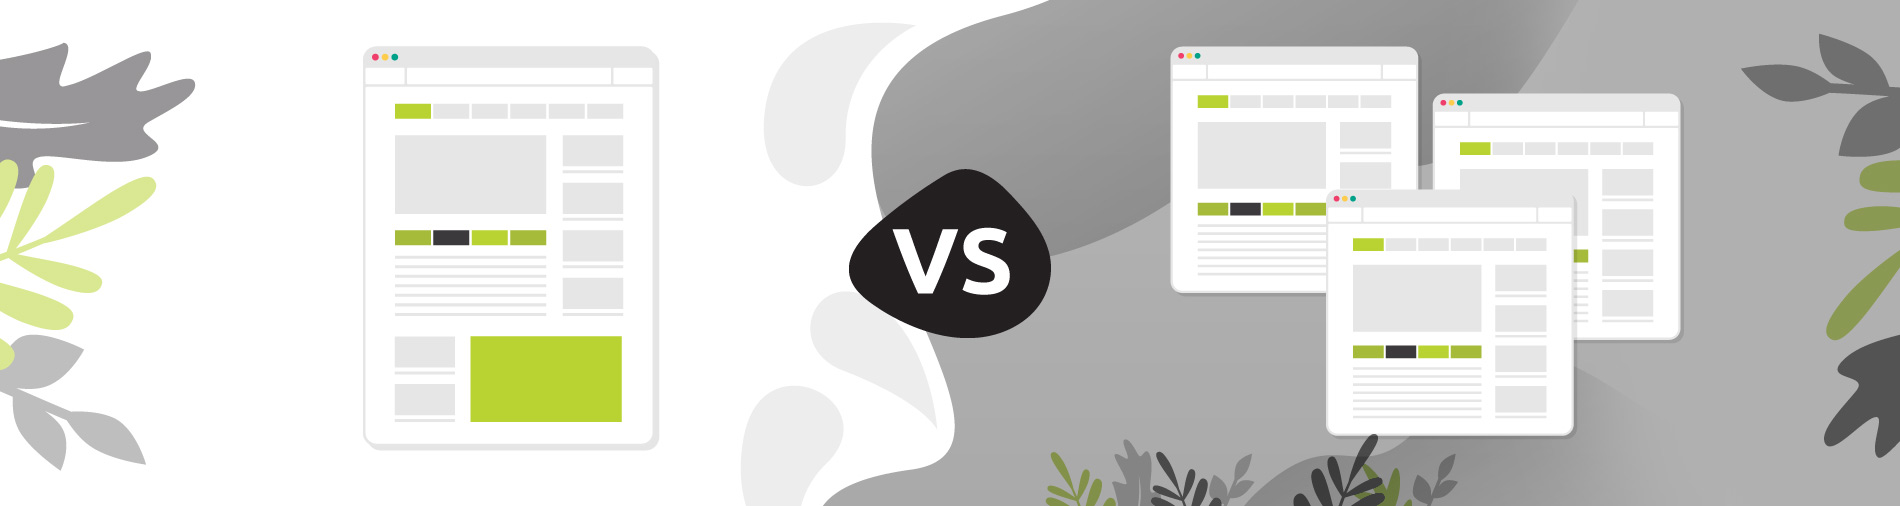 Single-Page vs. Multi-Page Websites: What’s the Best?